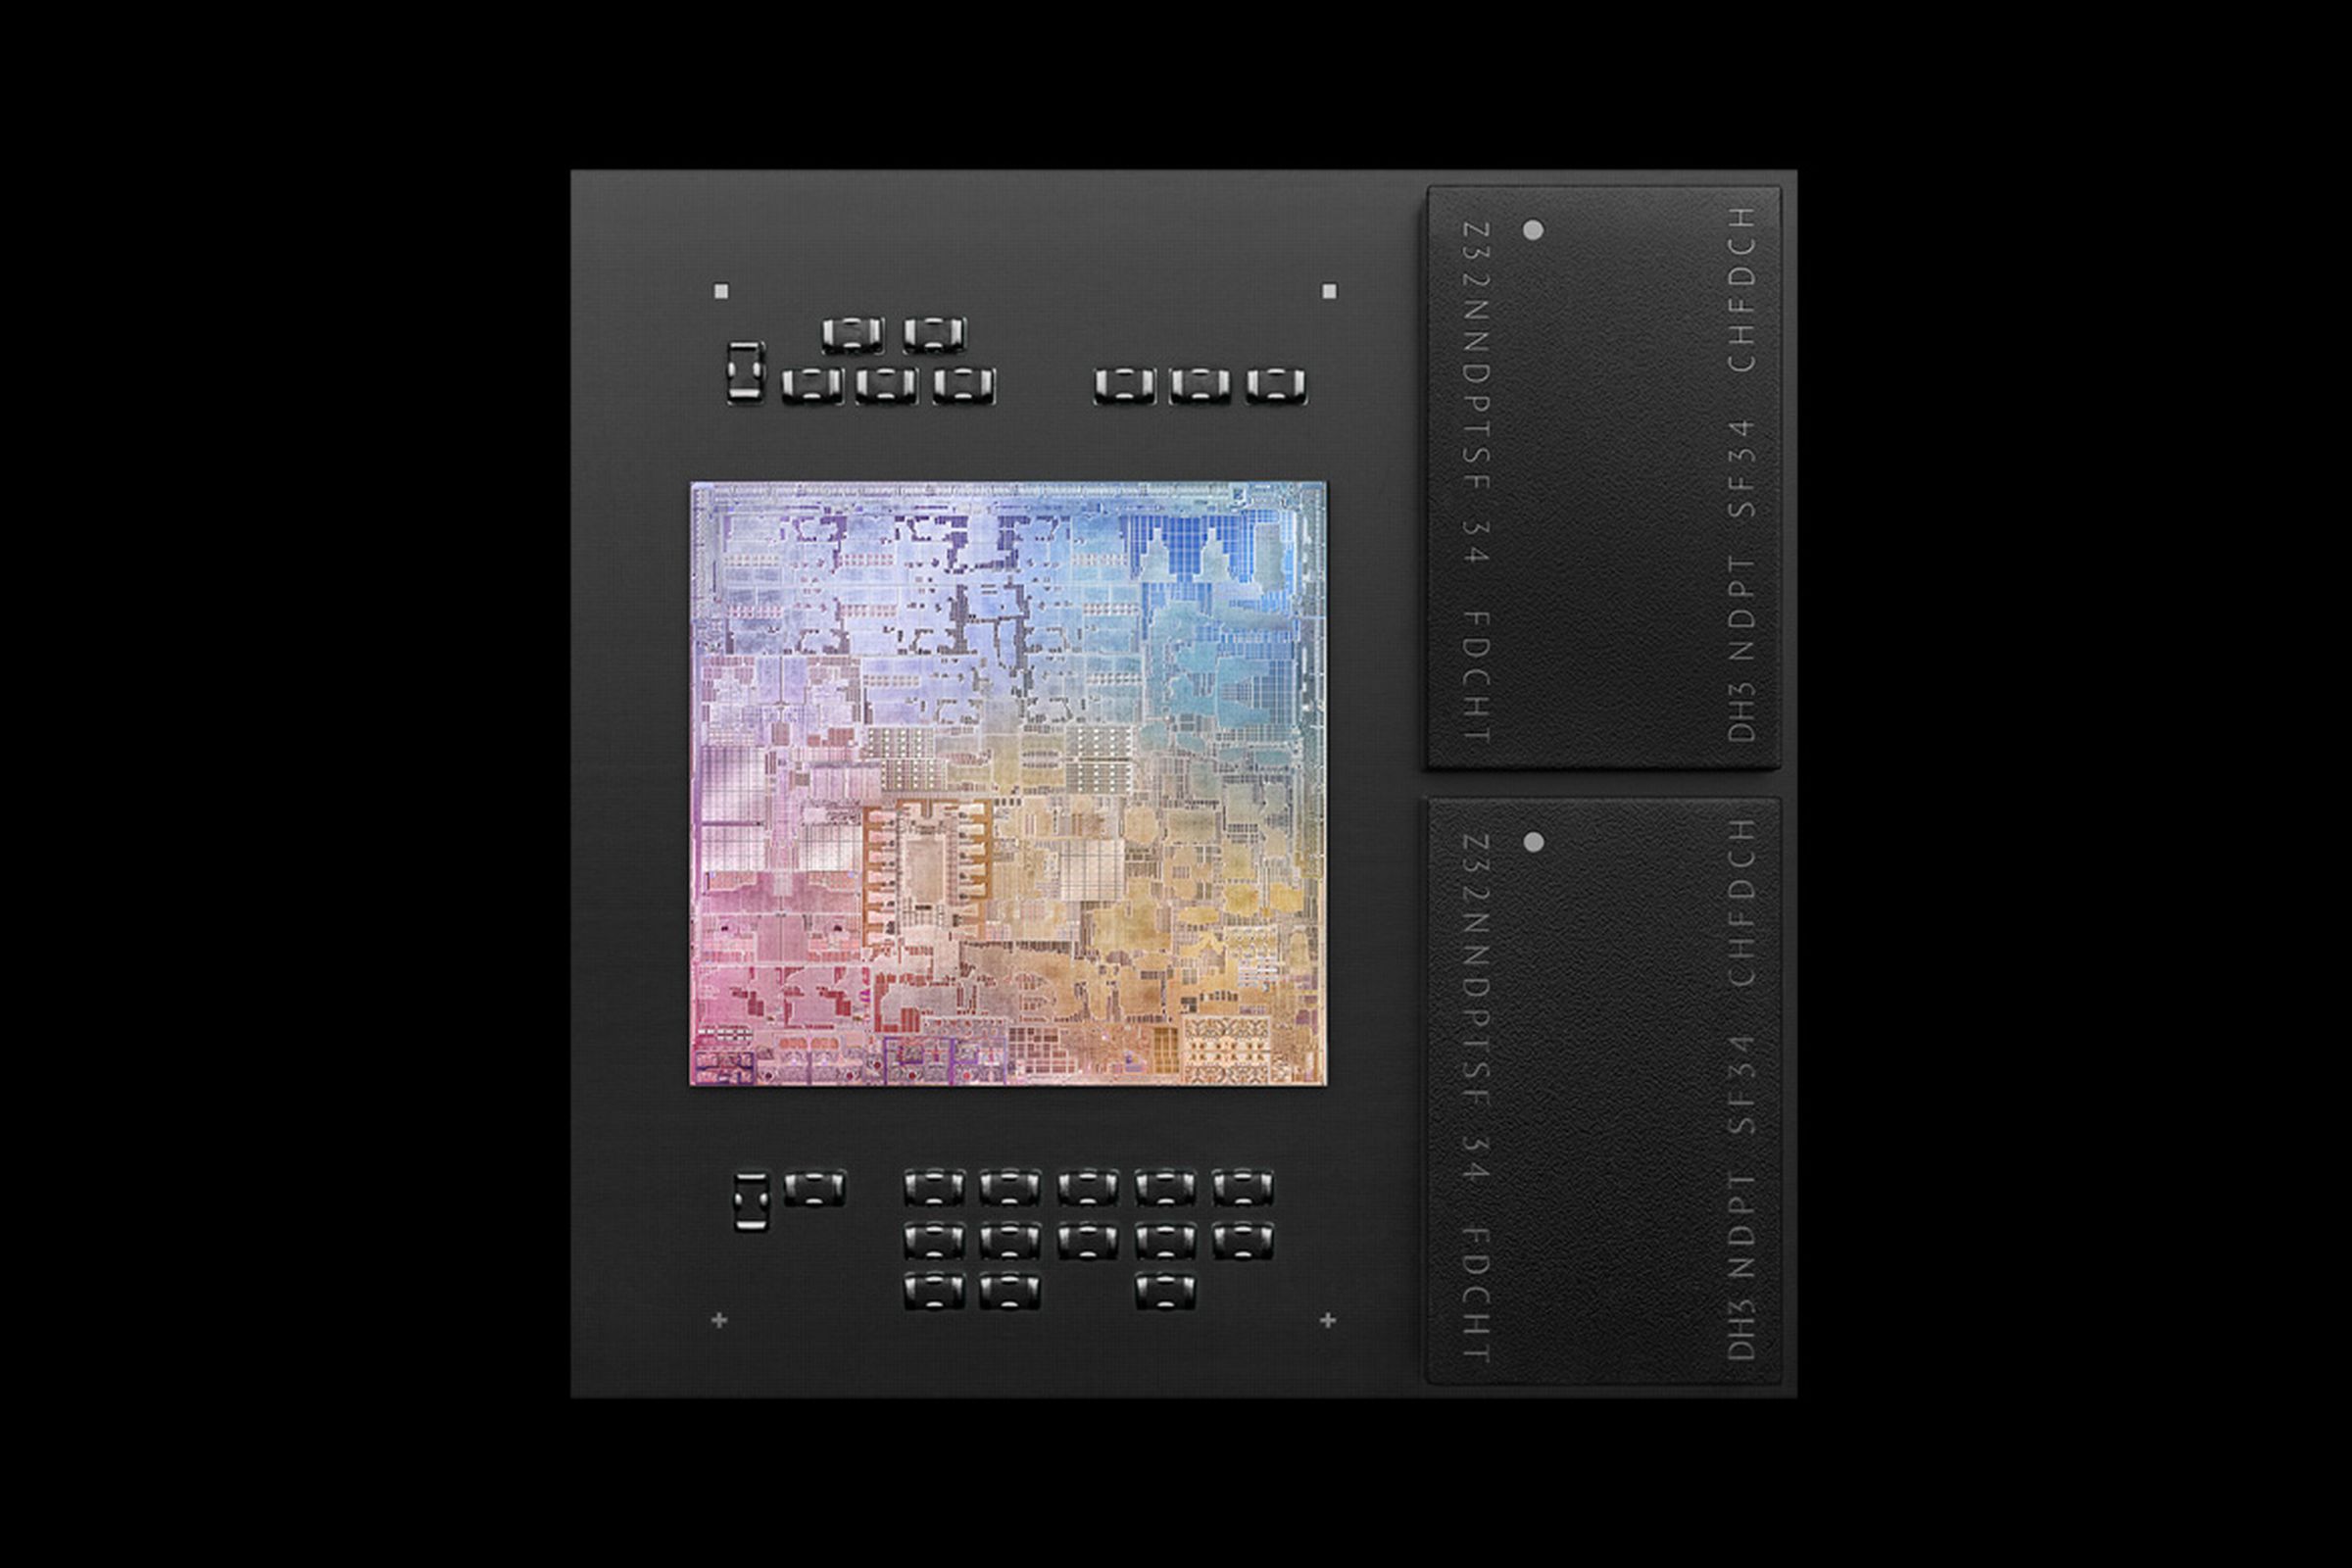 Apple’s M1 processor (pictured) is its first processor designed for the Mac.